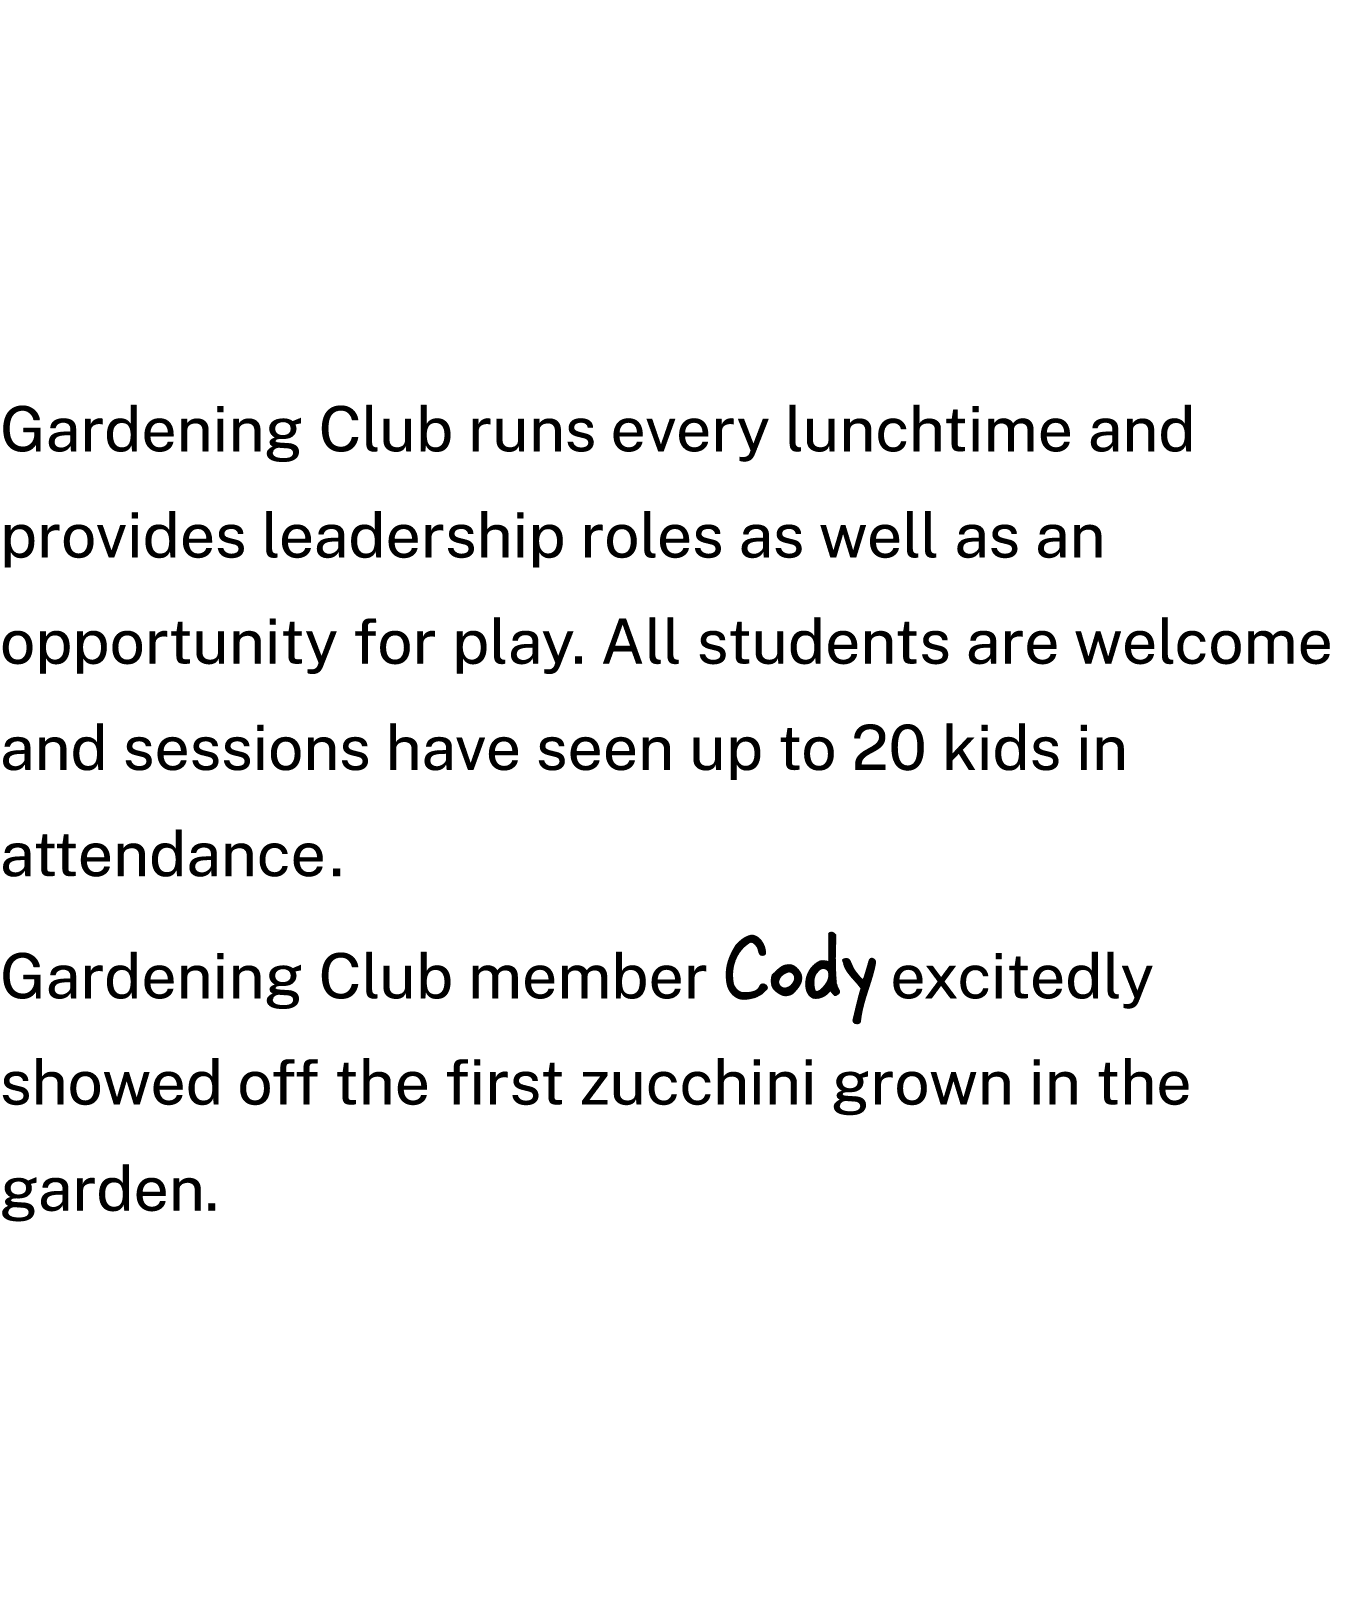 Gardening Club runs every lunchtime and provides leadership roles as well as an opportunity for play. All students ar...